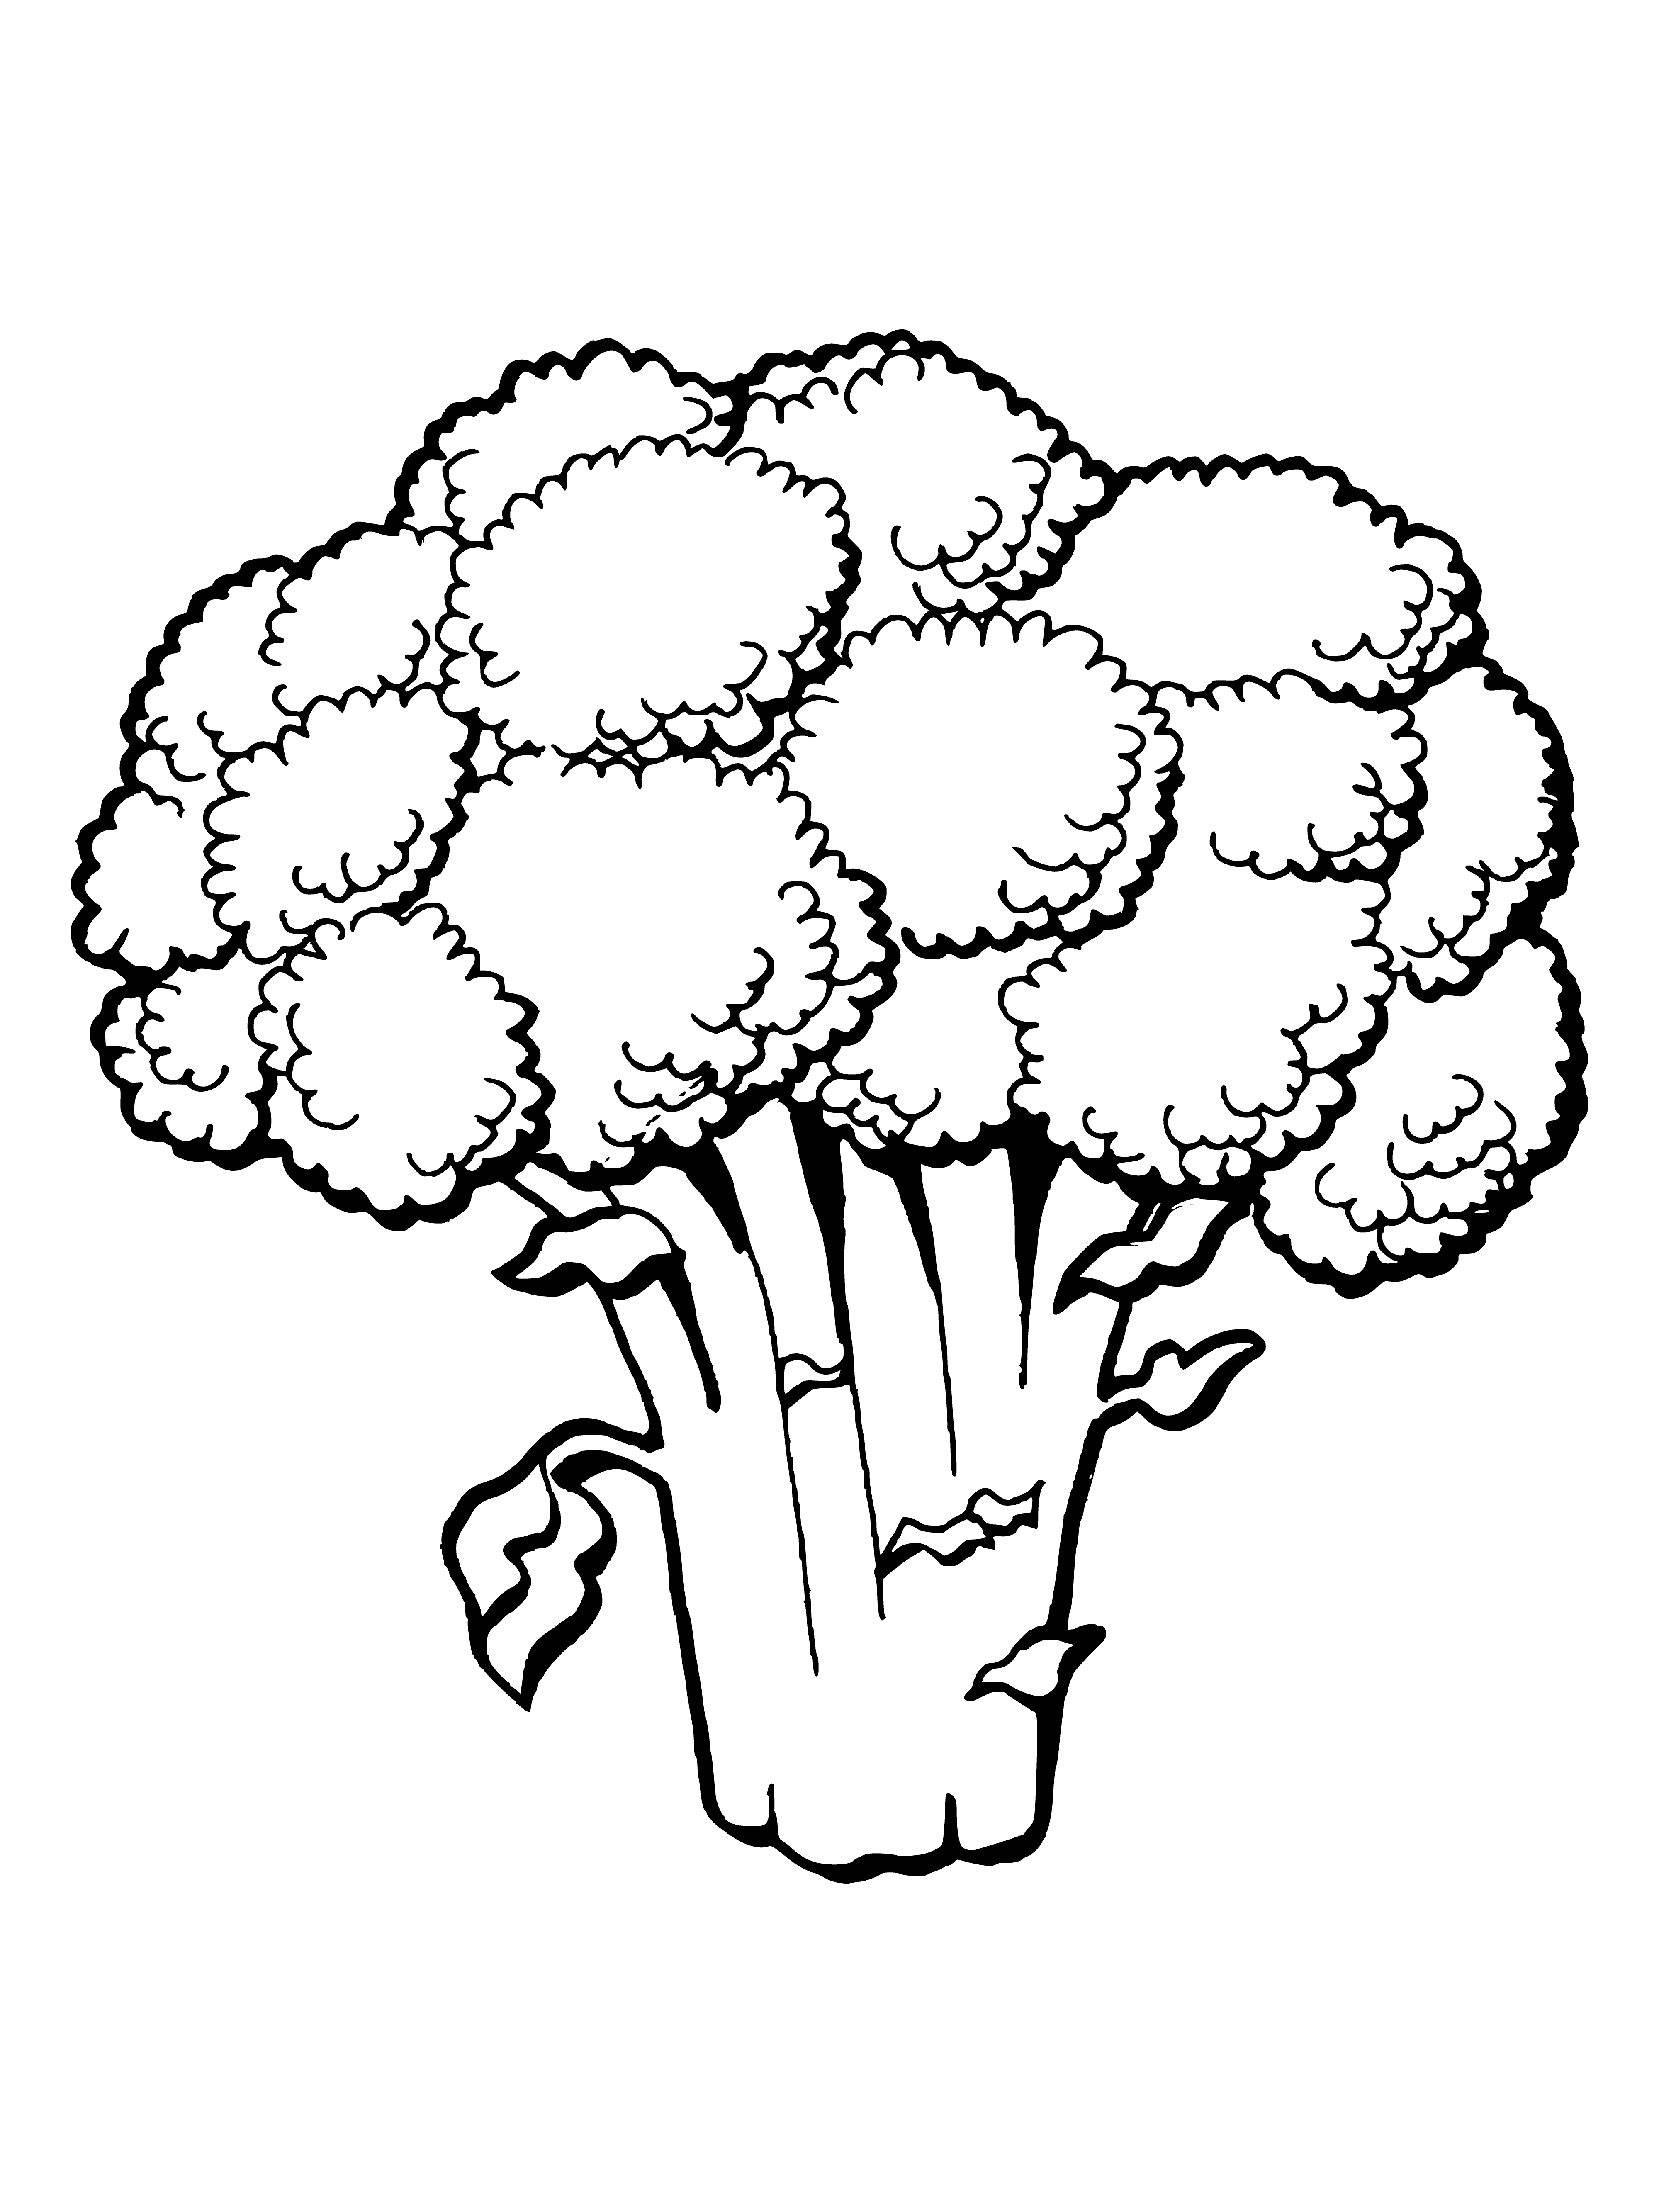 coloring page: Broccoli is a dark green veg with tree-like shape, edible stem & small florets clustered together.